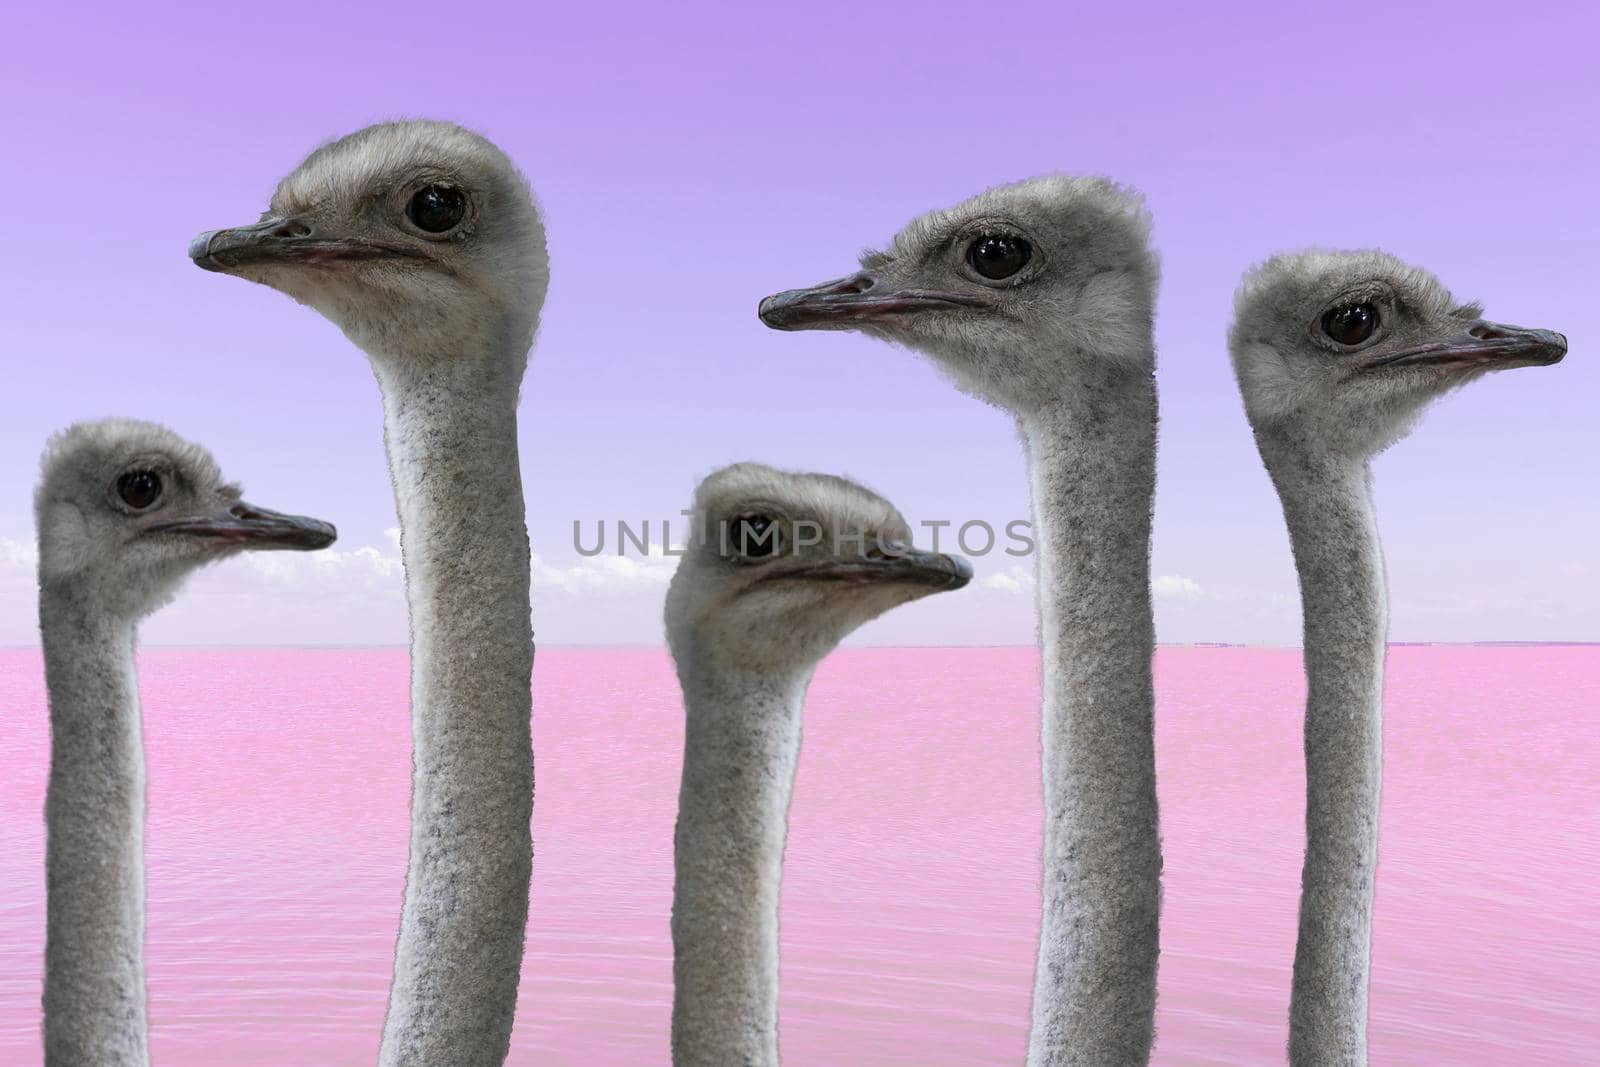 ostriches on the background of a beautiful pink seascape by Lena_Ogurtsova